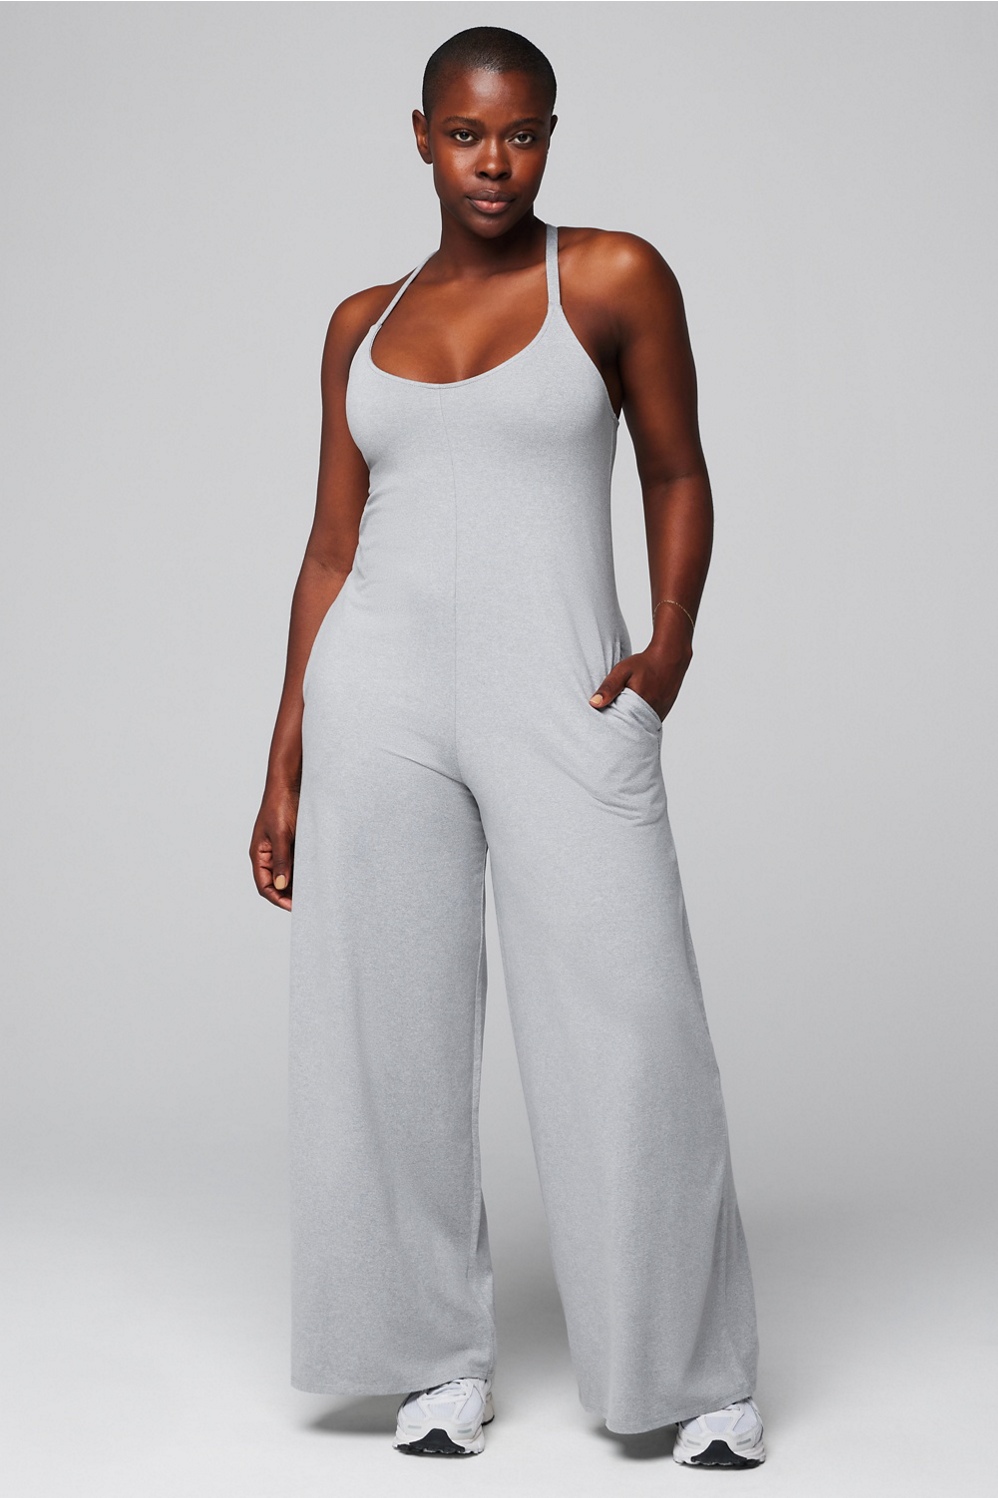 Fabletics Athletic Overalls for Women